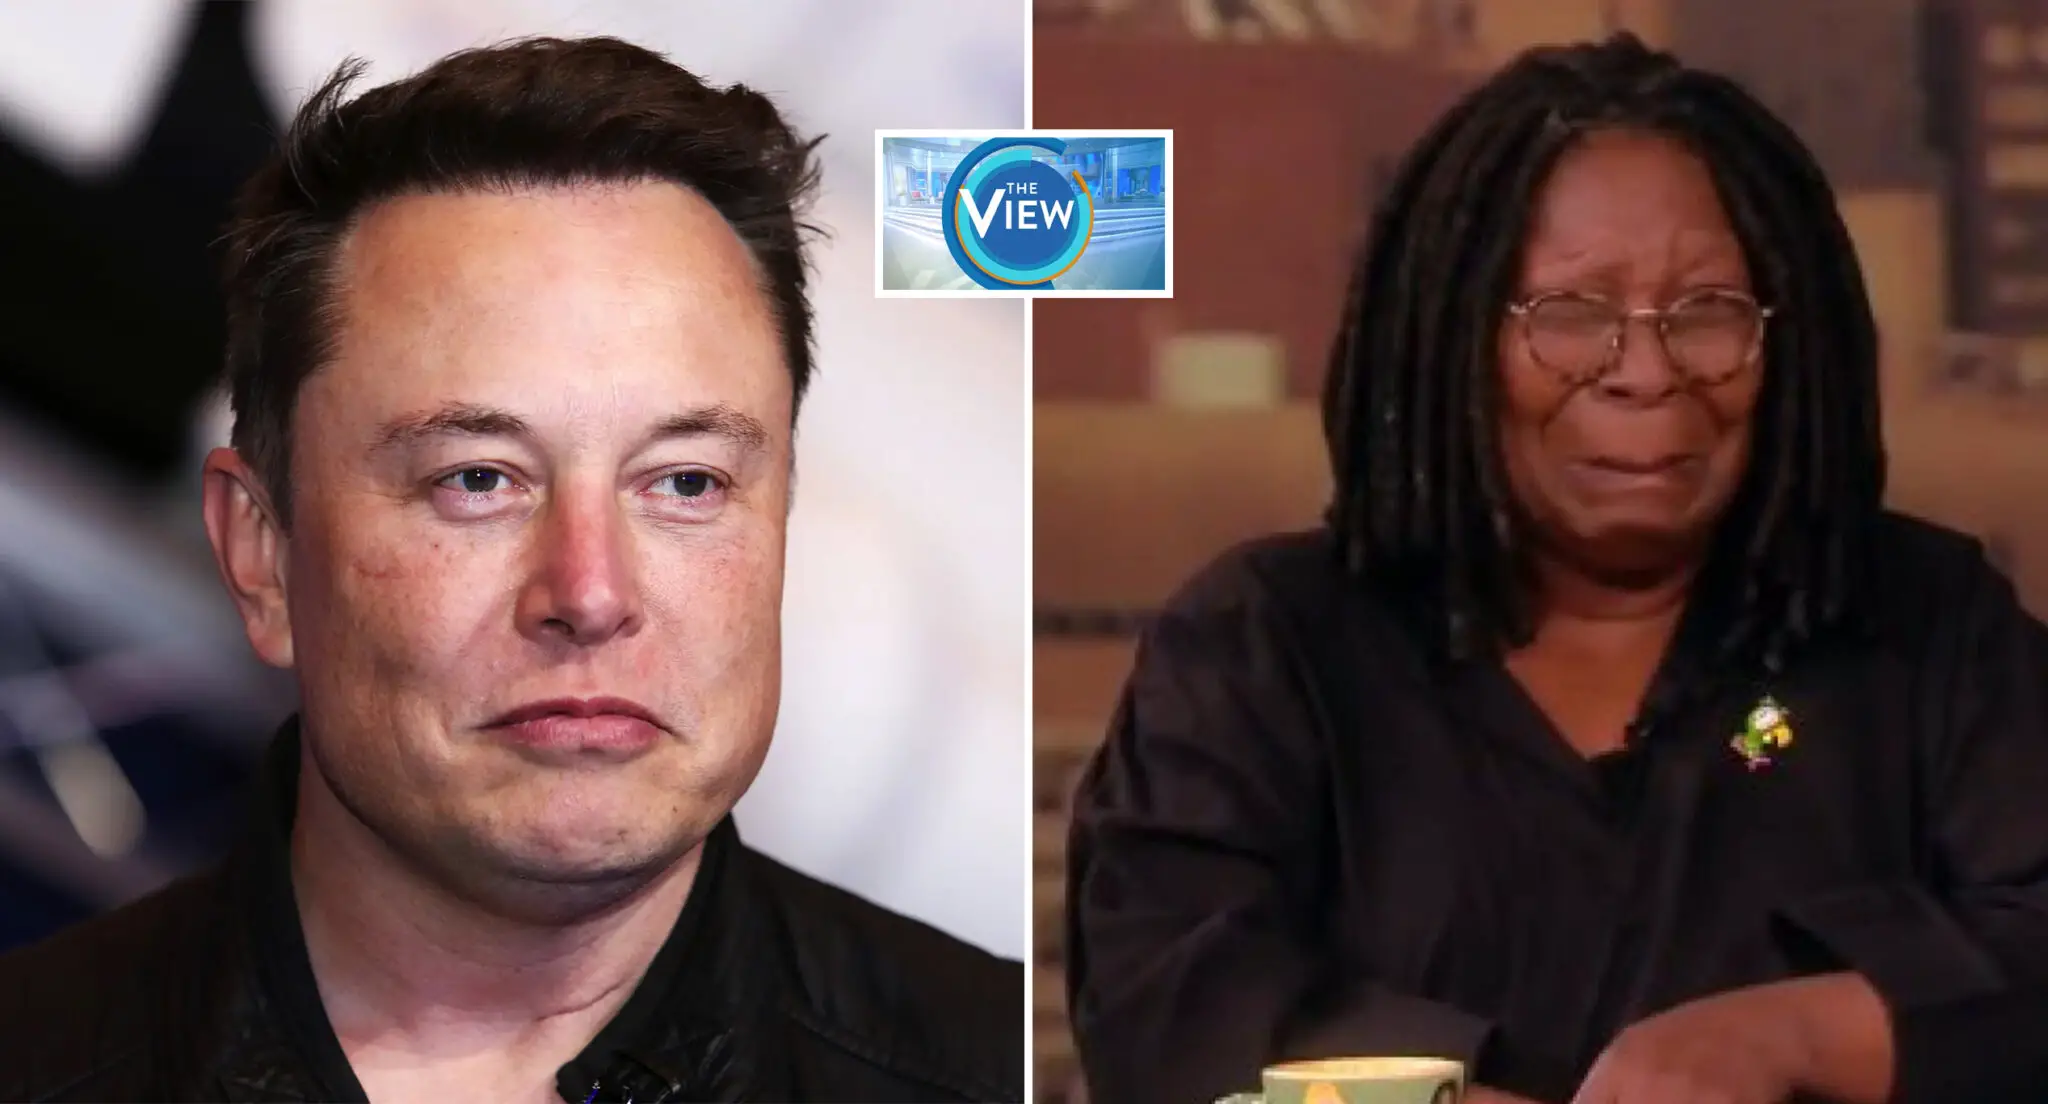 ABC declines to renew Whoopi Goldberg’s contract under Elon Musk’s leadership